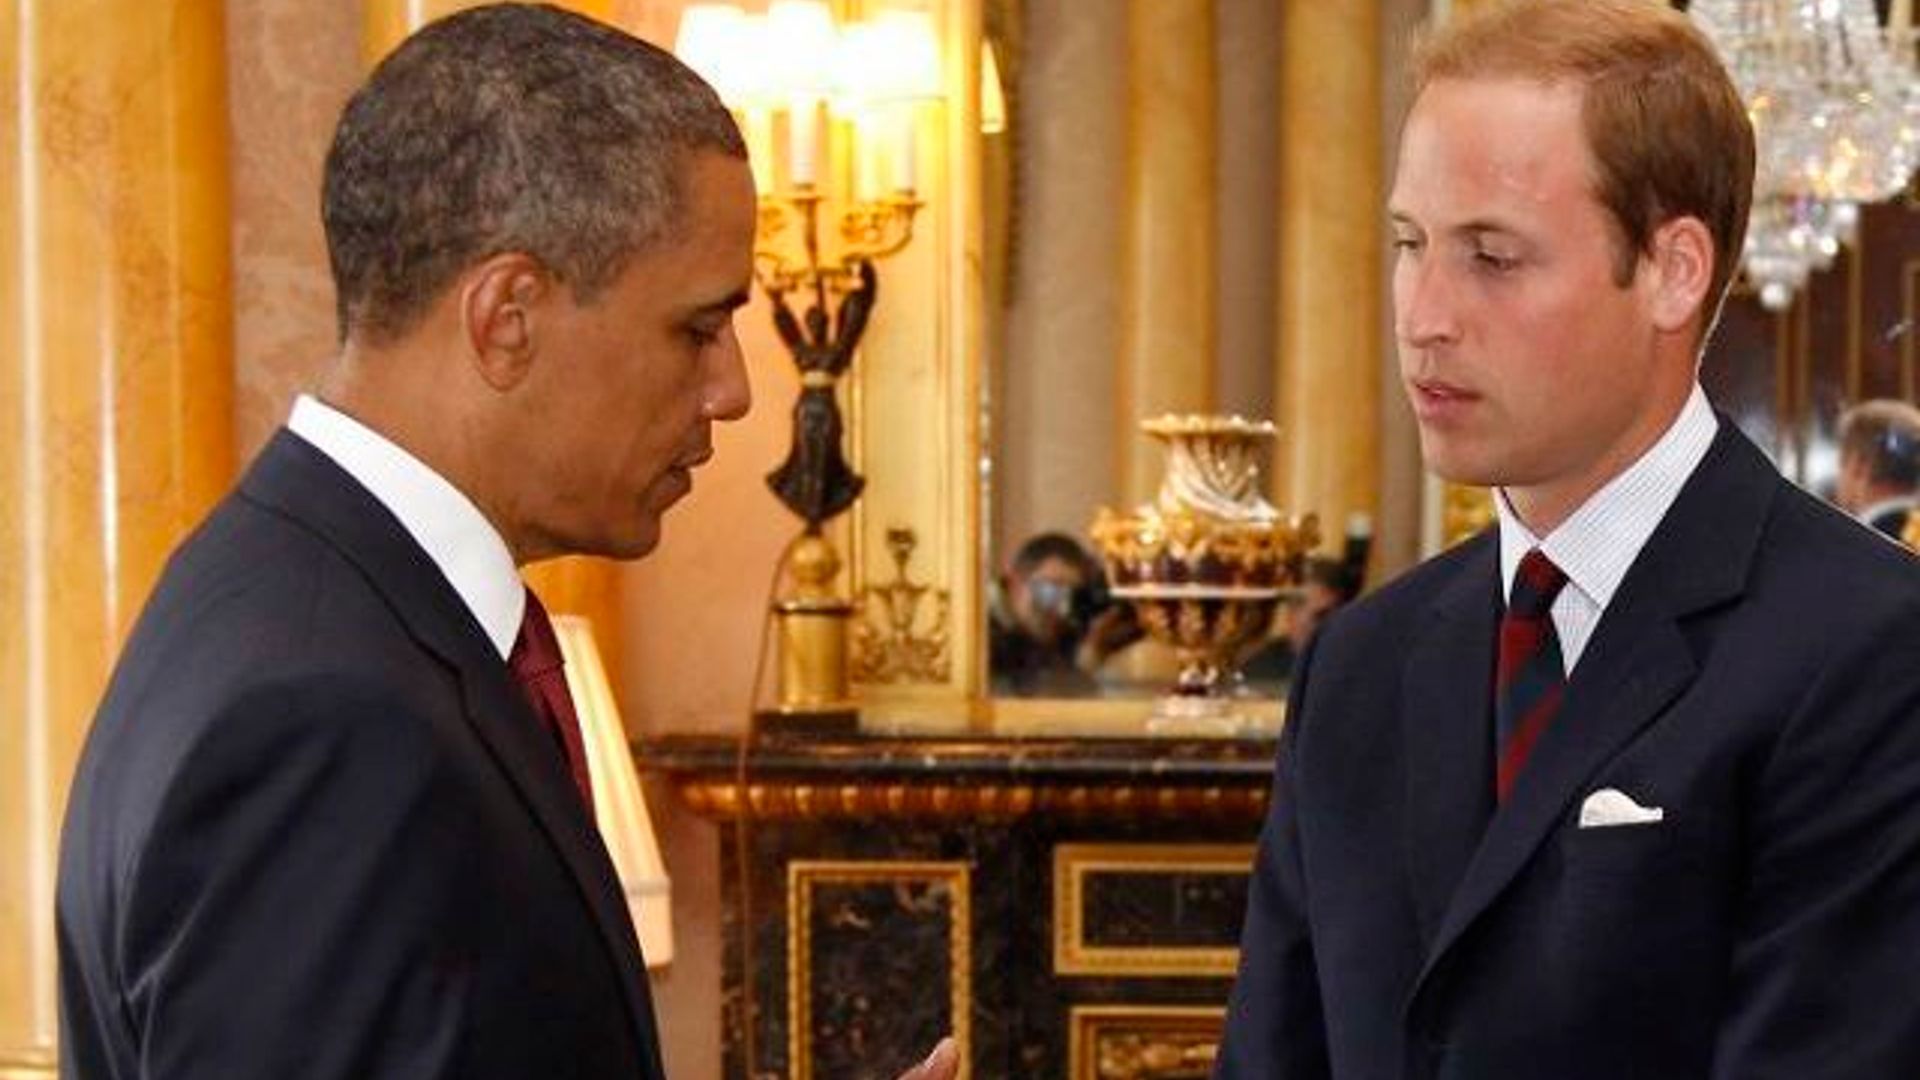 Prince William set to visit President Obama at the White House